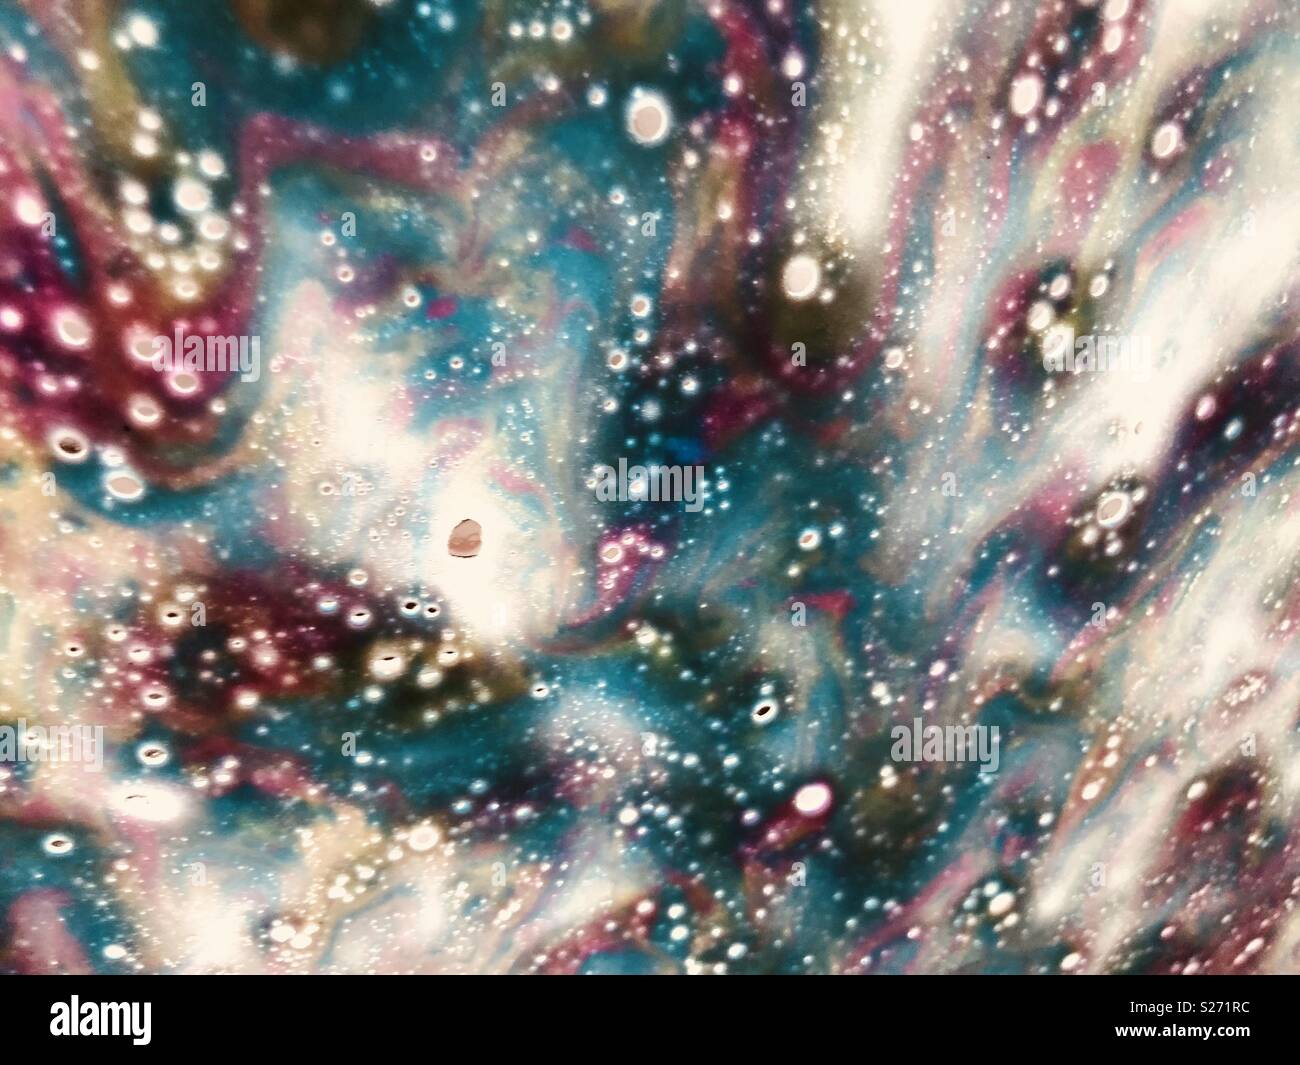 Soap suds on a car window going through a car wash make a vibrant and colorful abstract pattern. Stock Photo